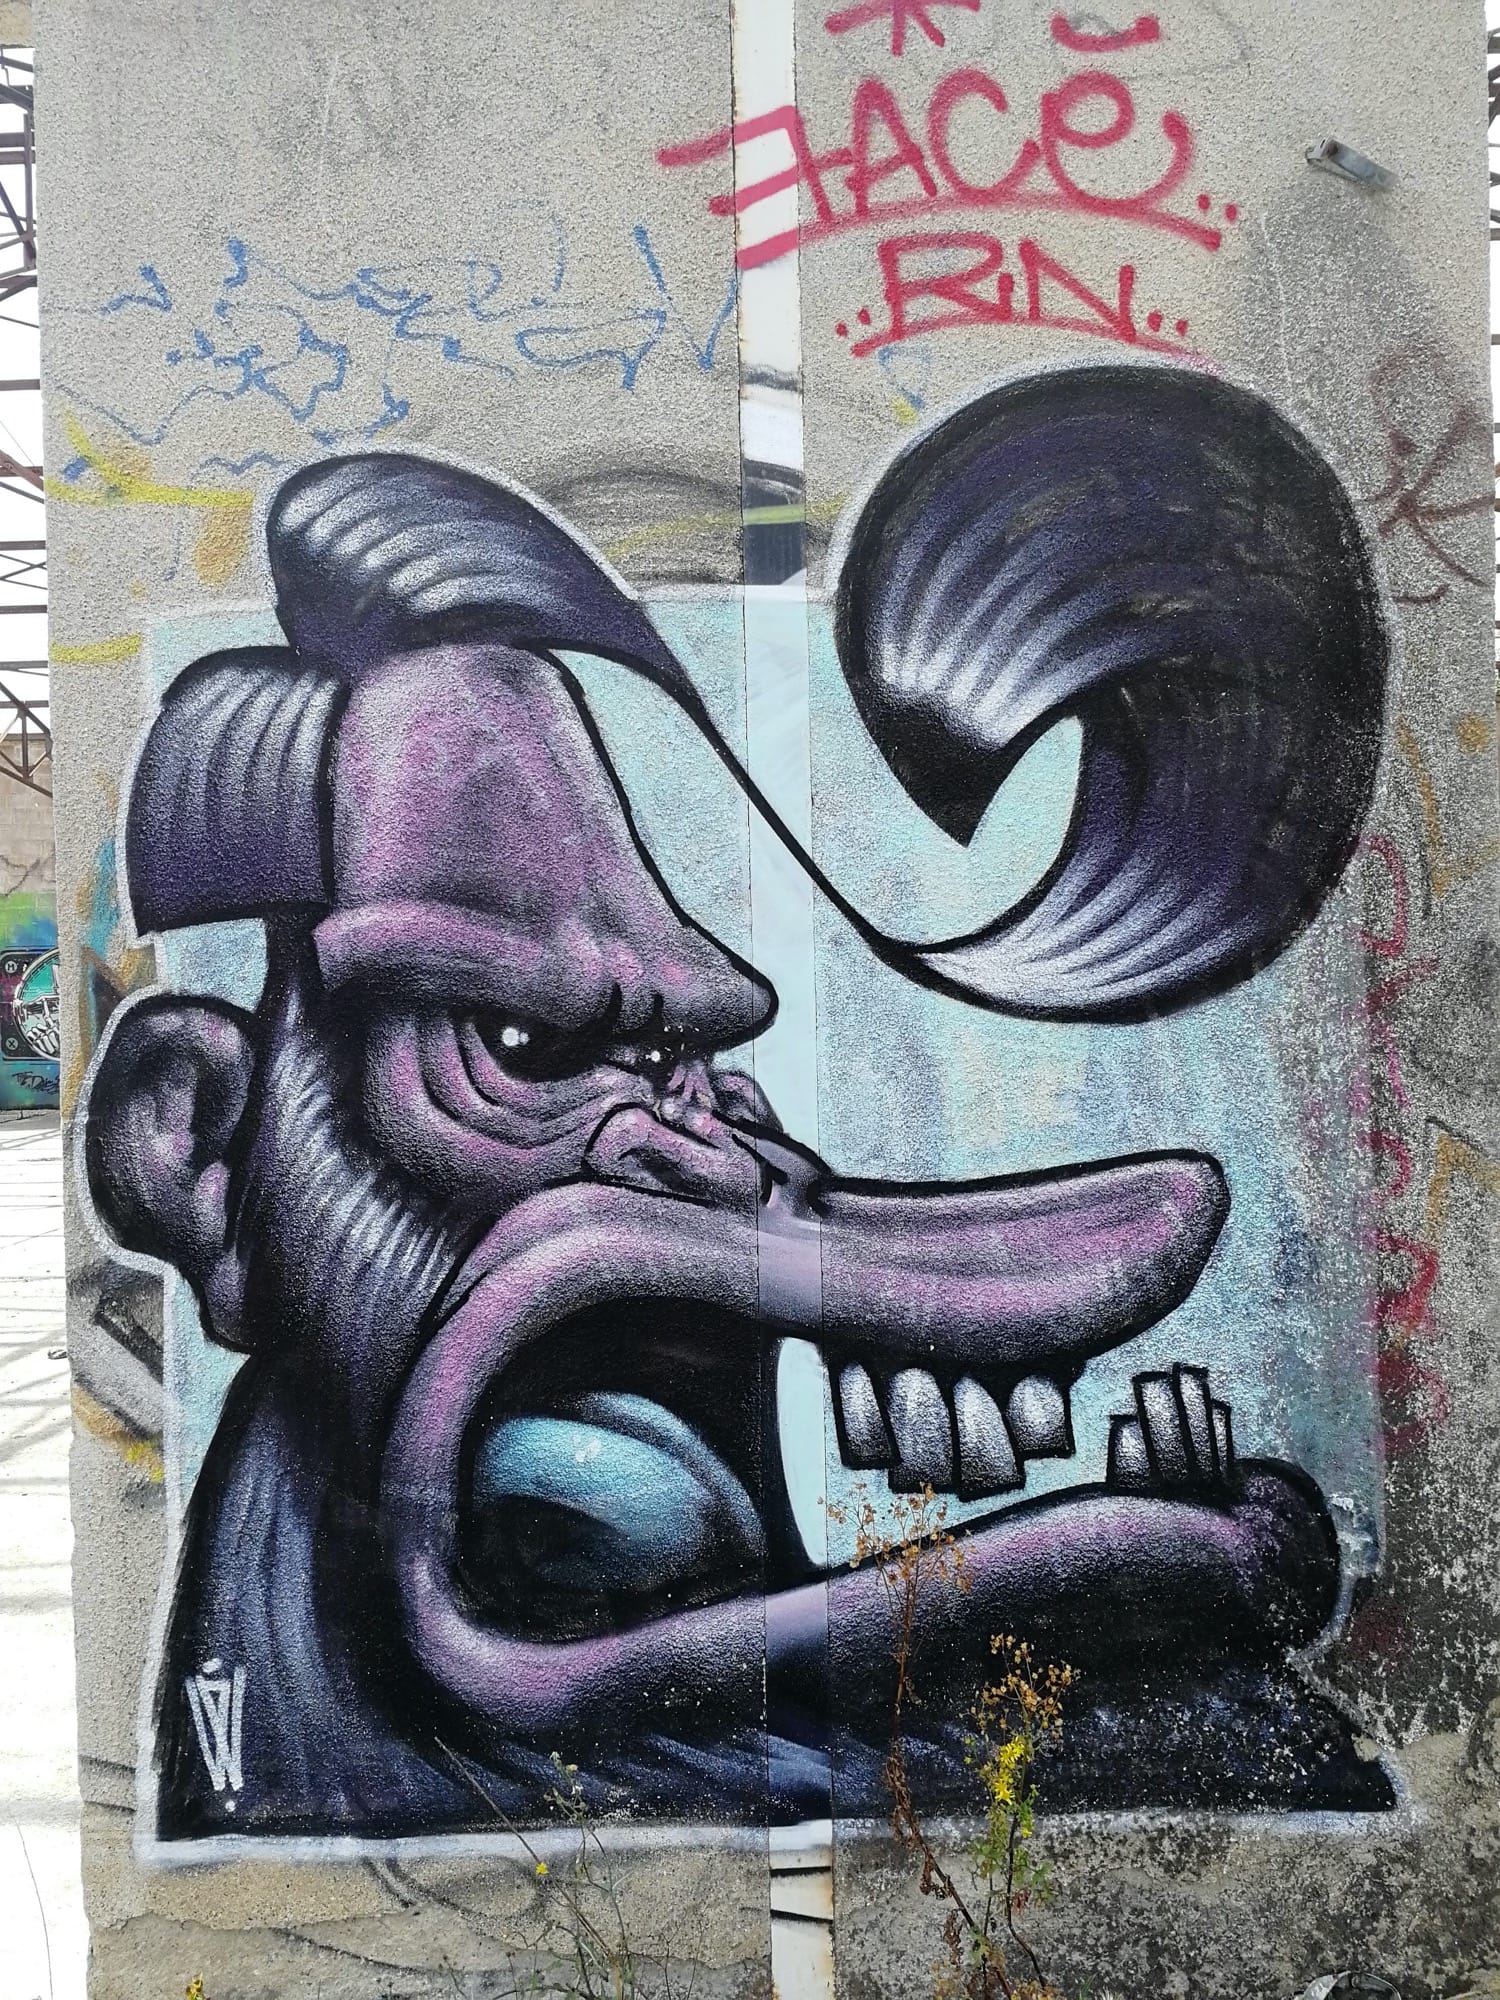 Graffiti 3089  by the artist Lélé captured by Rabot in Chantepie France